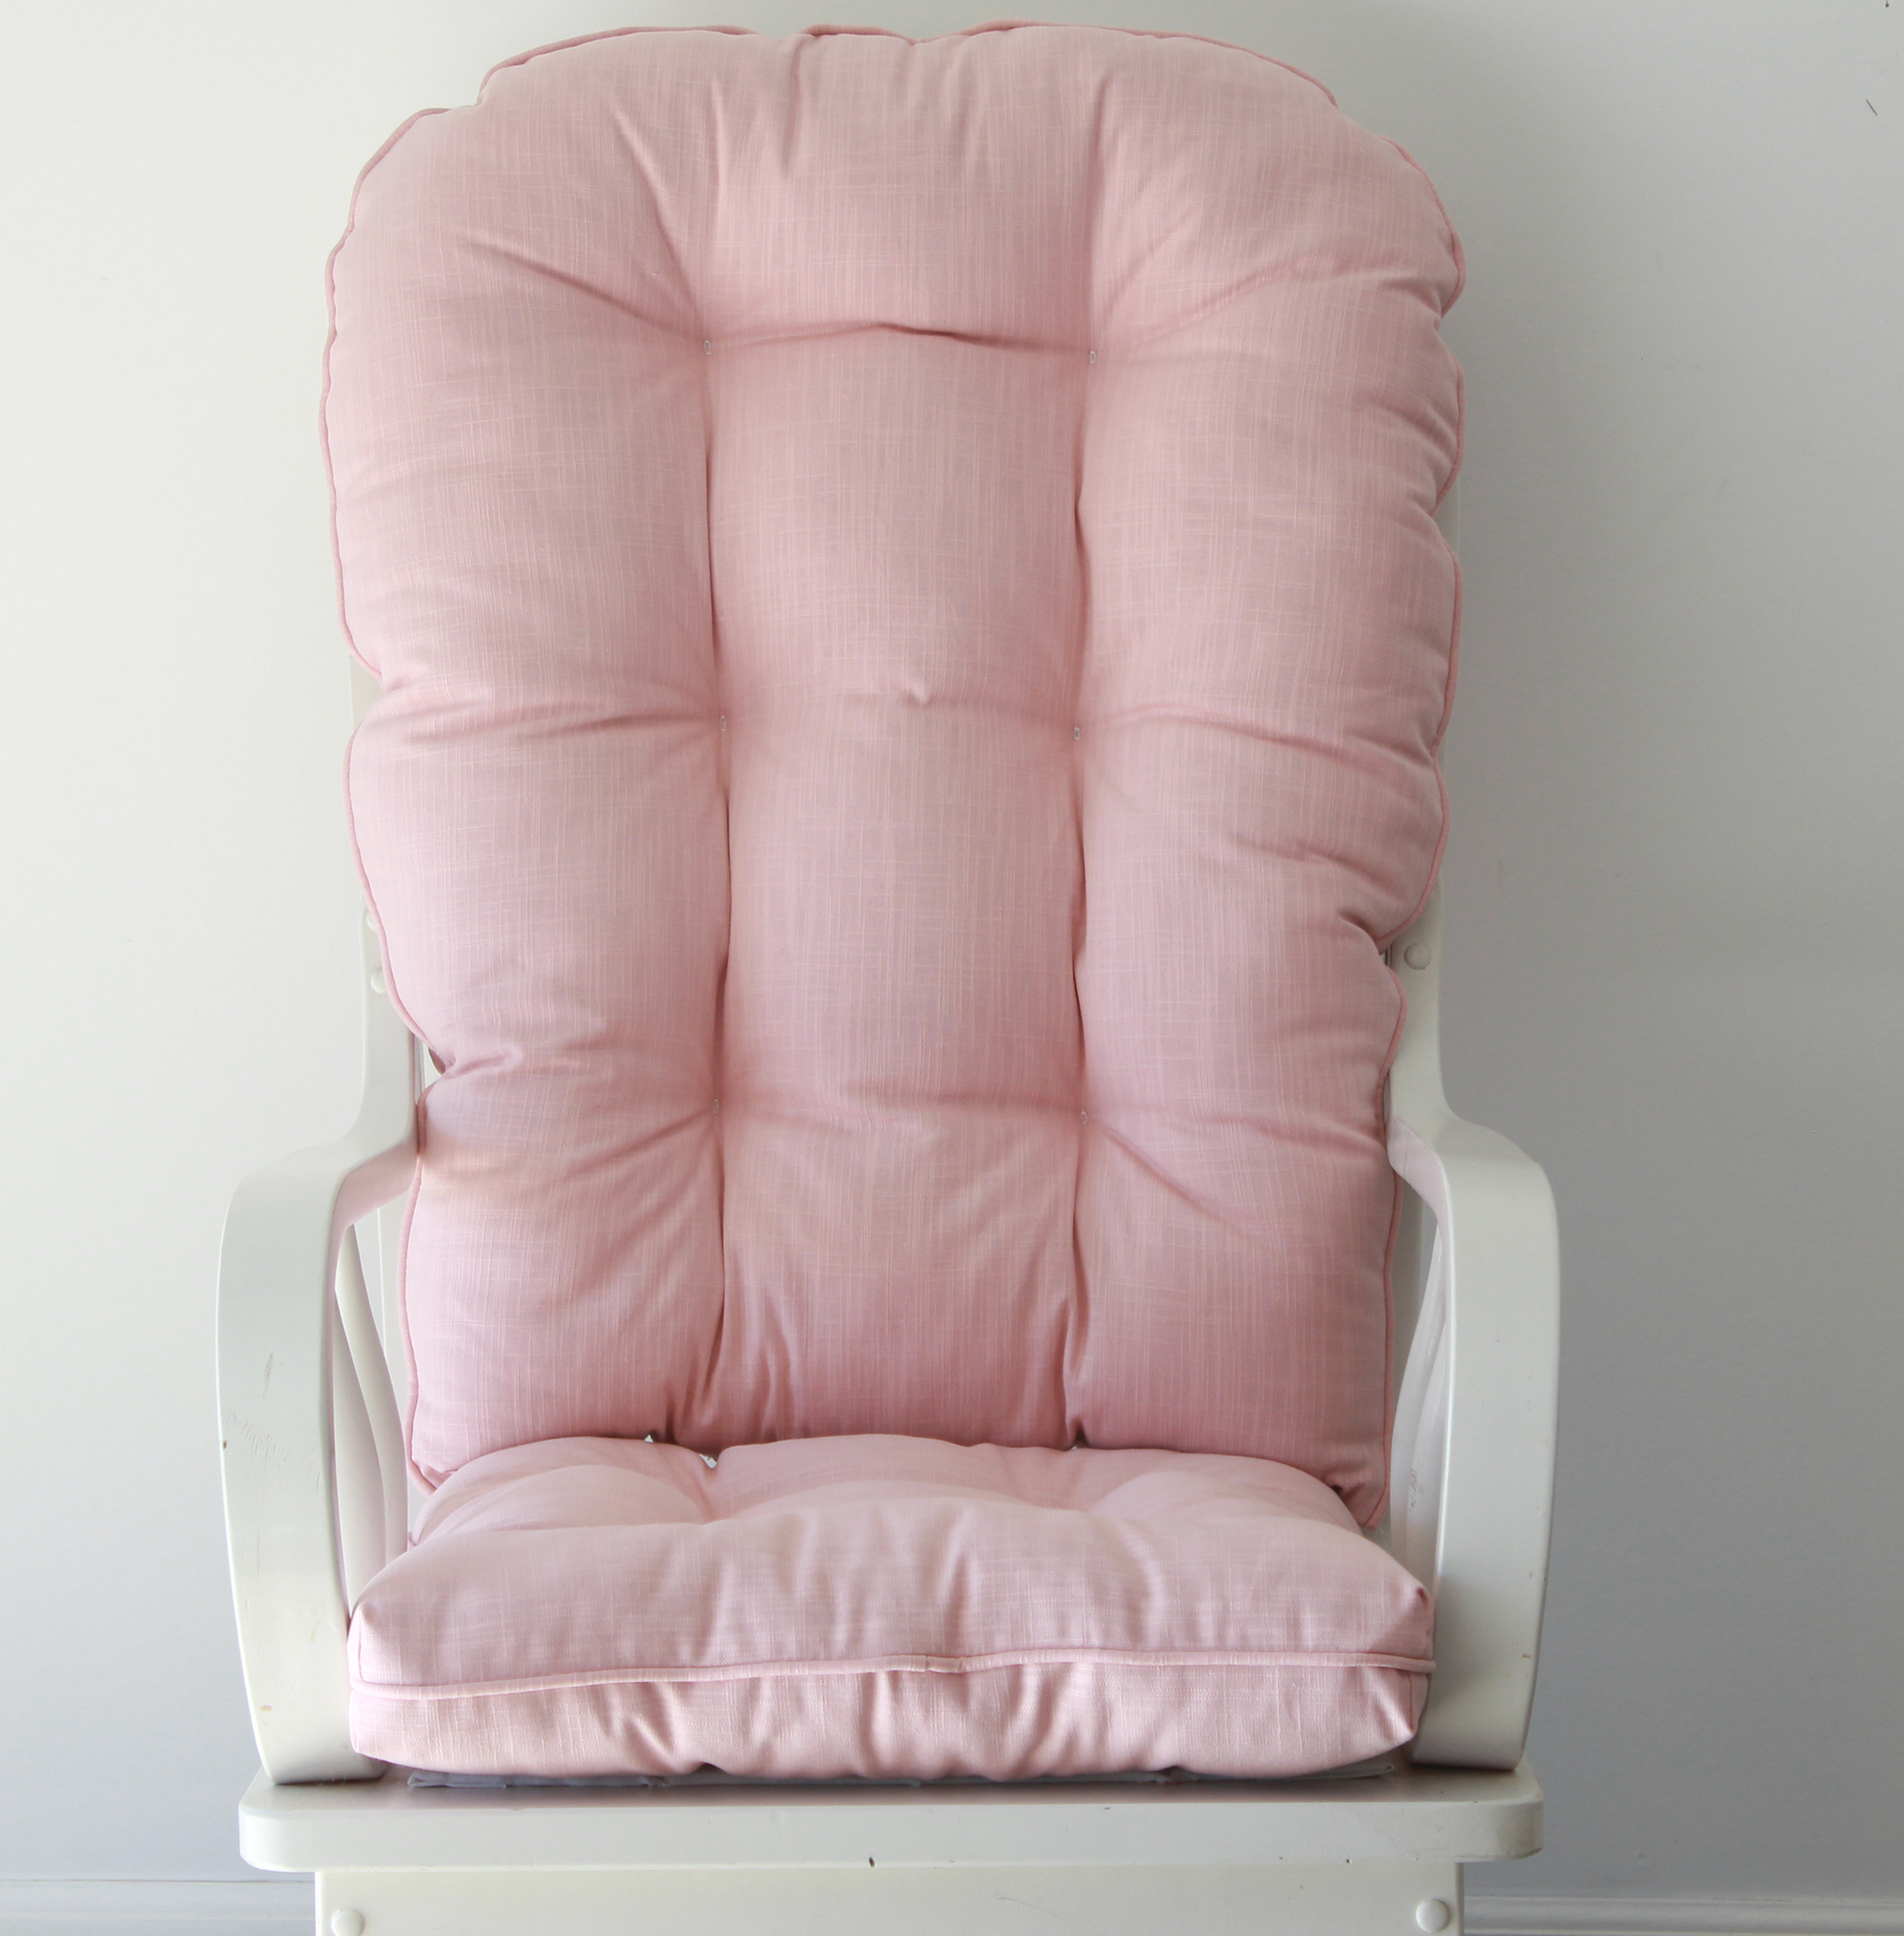 Solid blush pink upholstery fabric on a set of round top glider rocker cushions